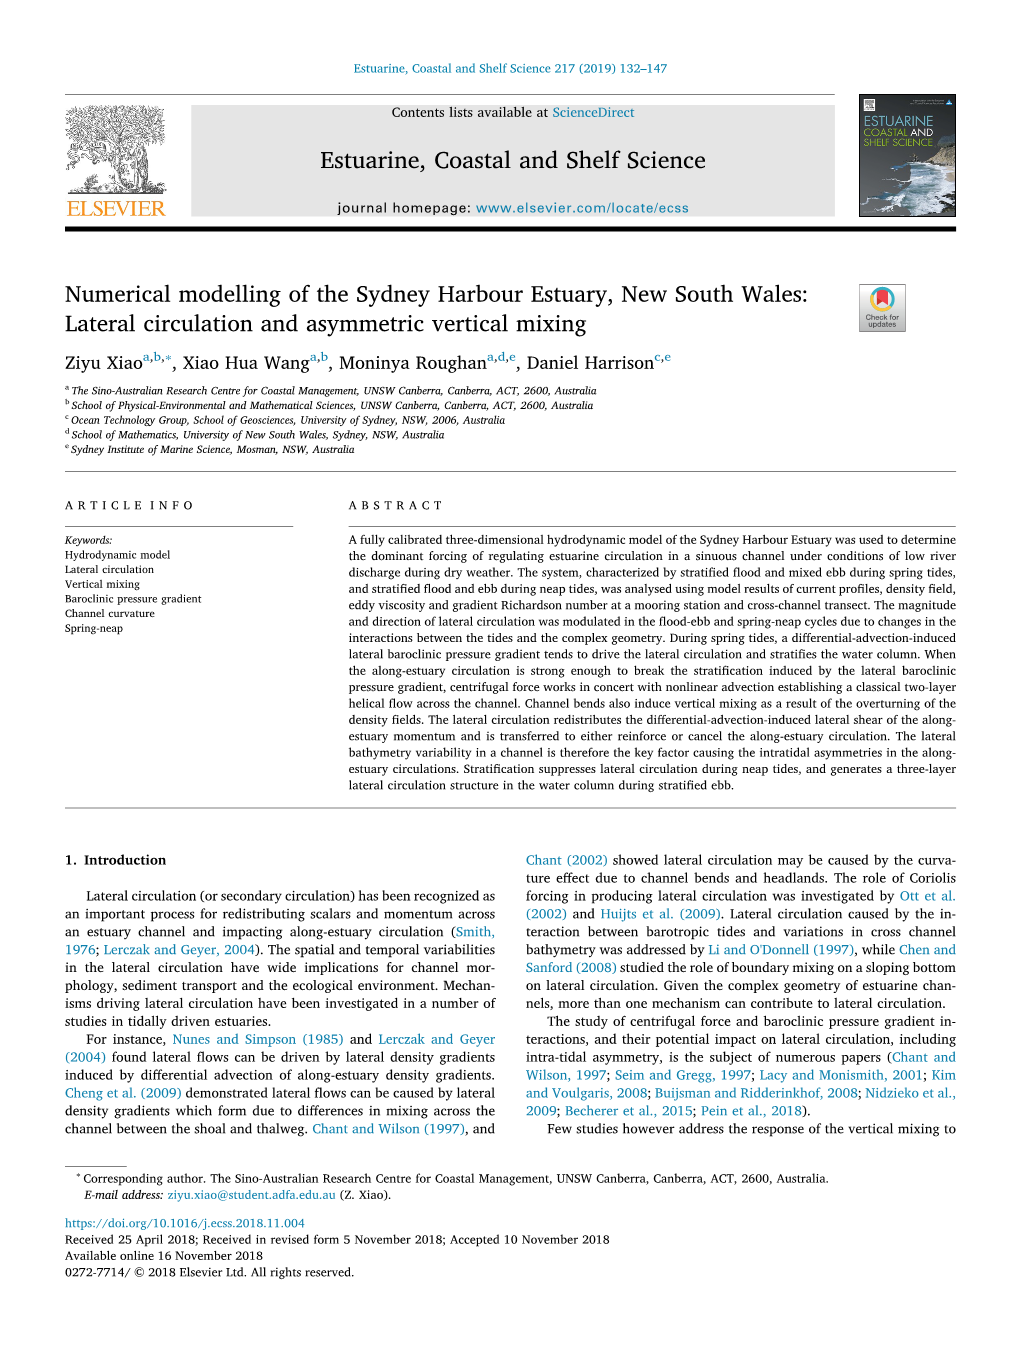 Numerical Modelling of the Sydney Harbour Estuary, New South Wales Lateral Circulation and Asymmetric Vertical Mixing